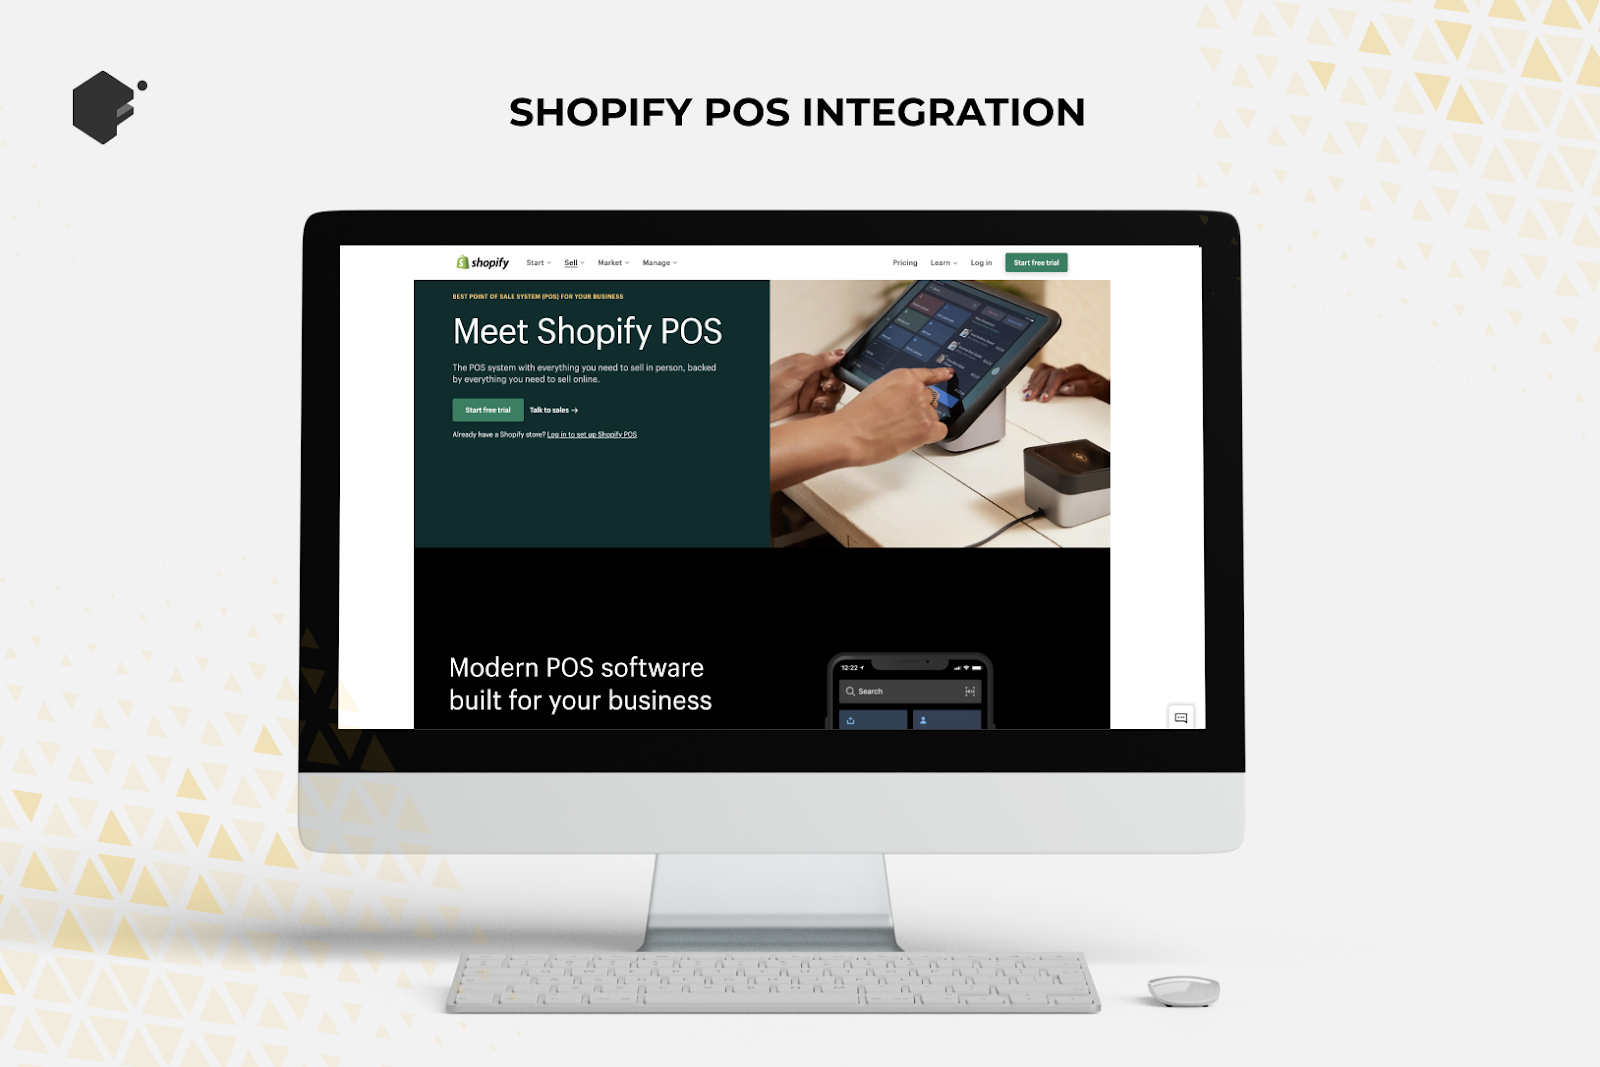 How Integrate POS Point of Sale software and equipment with Shopify